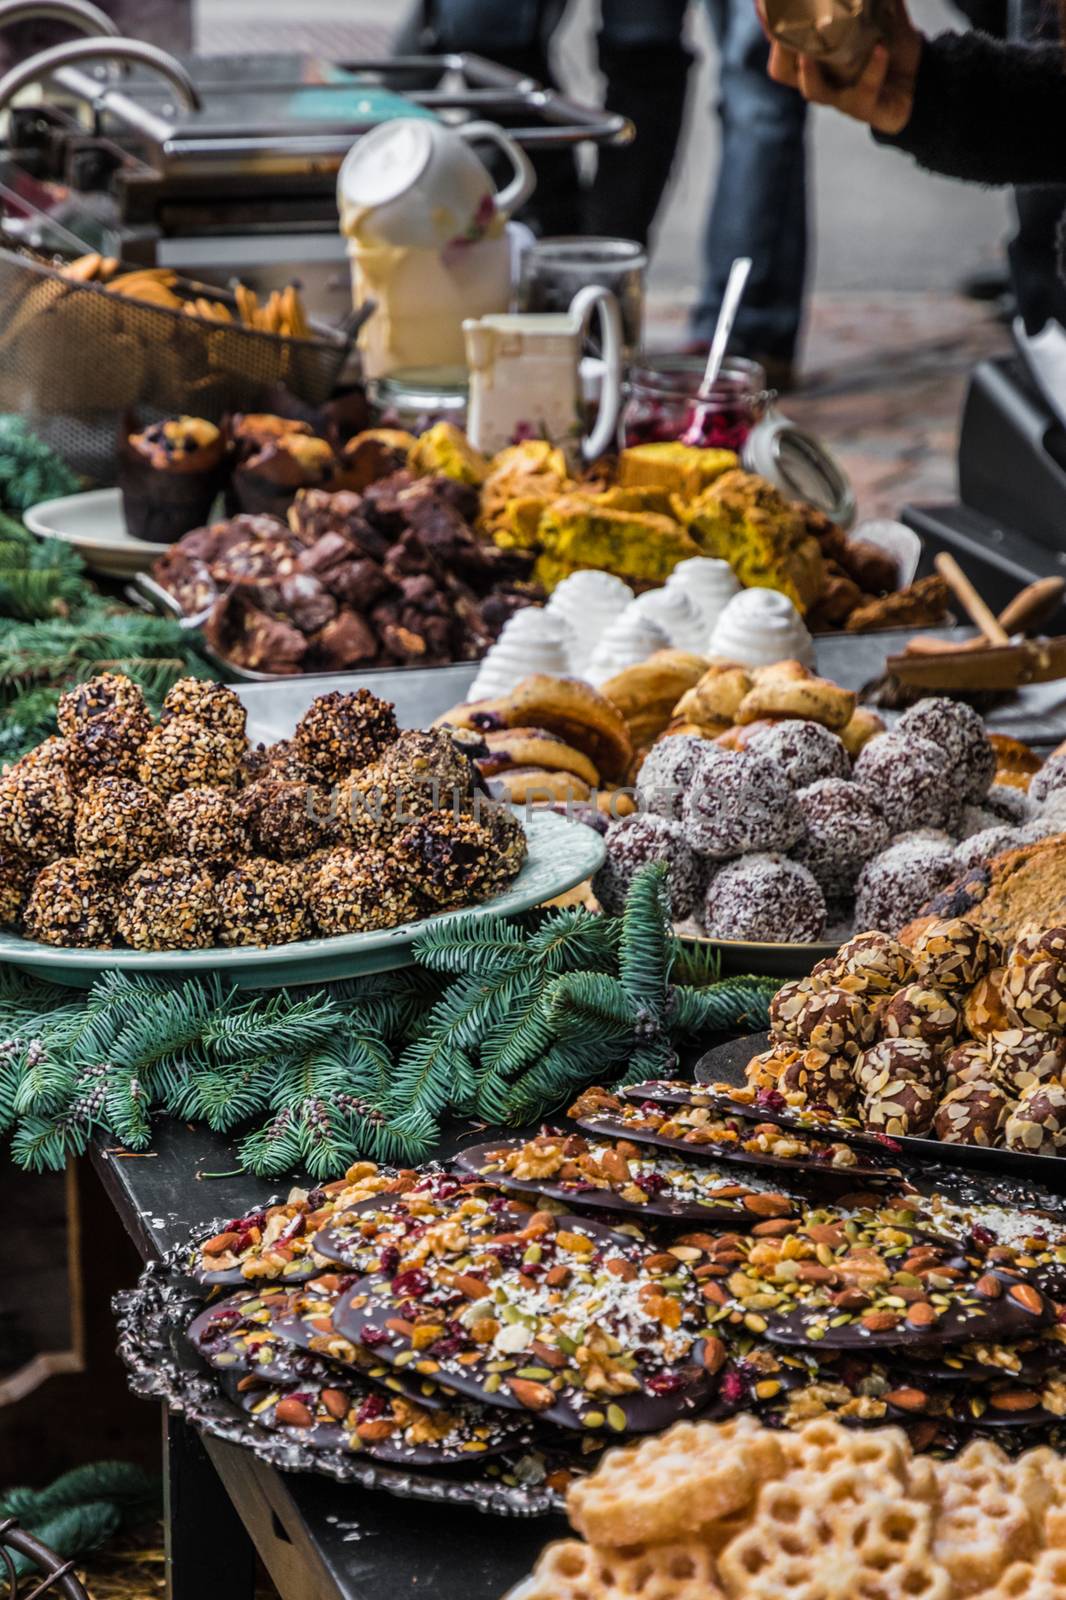 Cookies, pastries, cakes, biscuits at swedish street food market by MXW_Stock